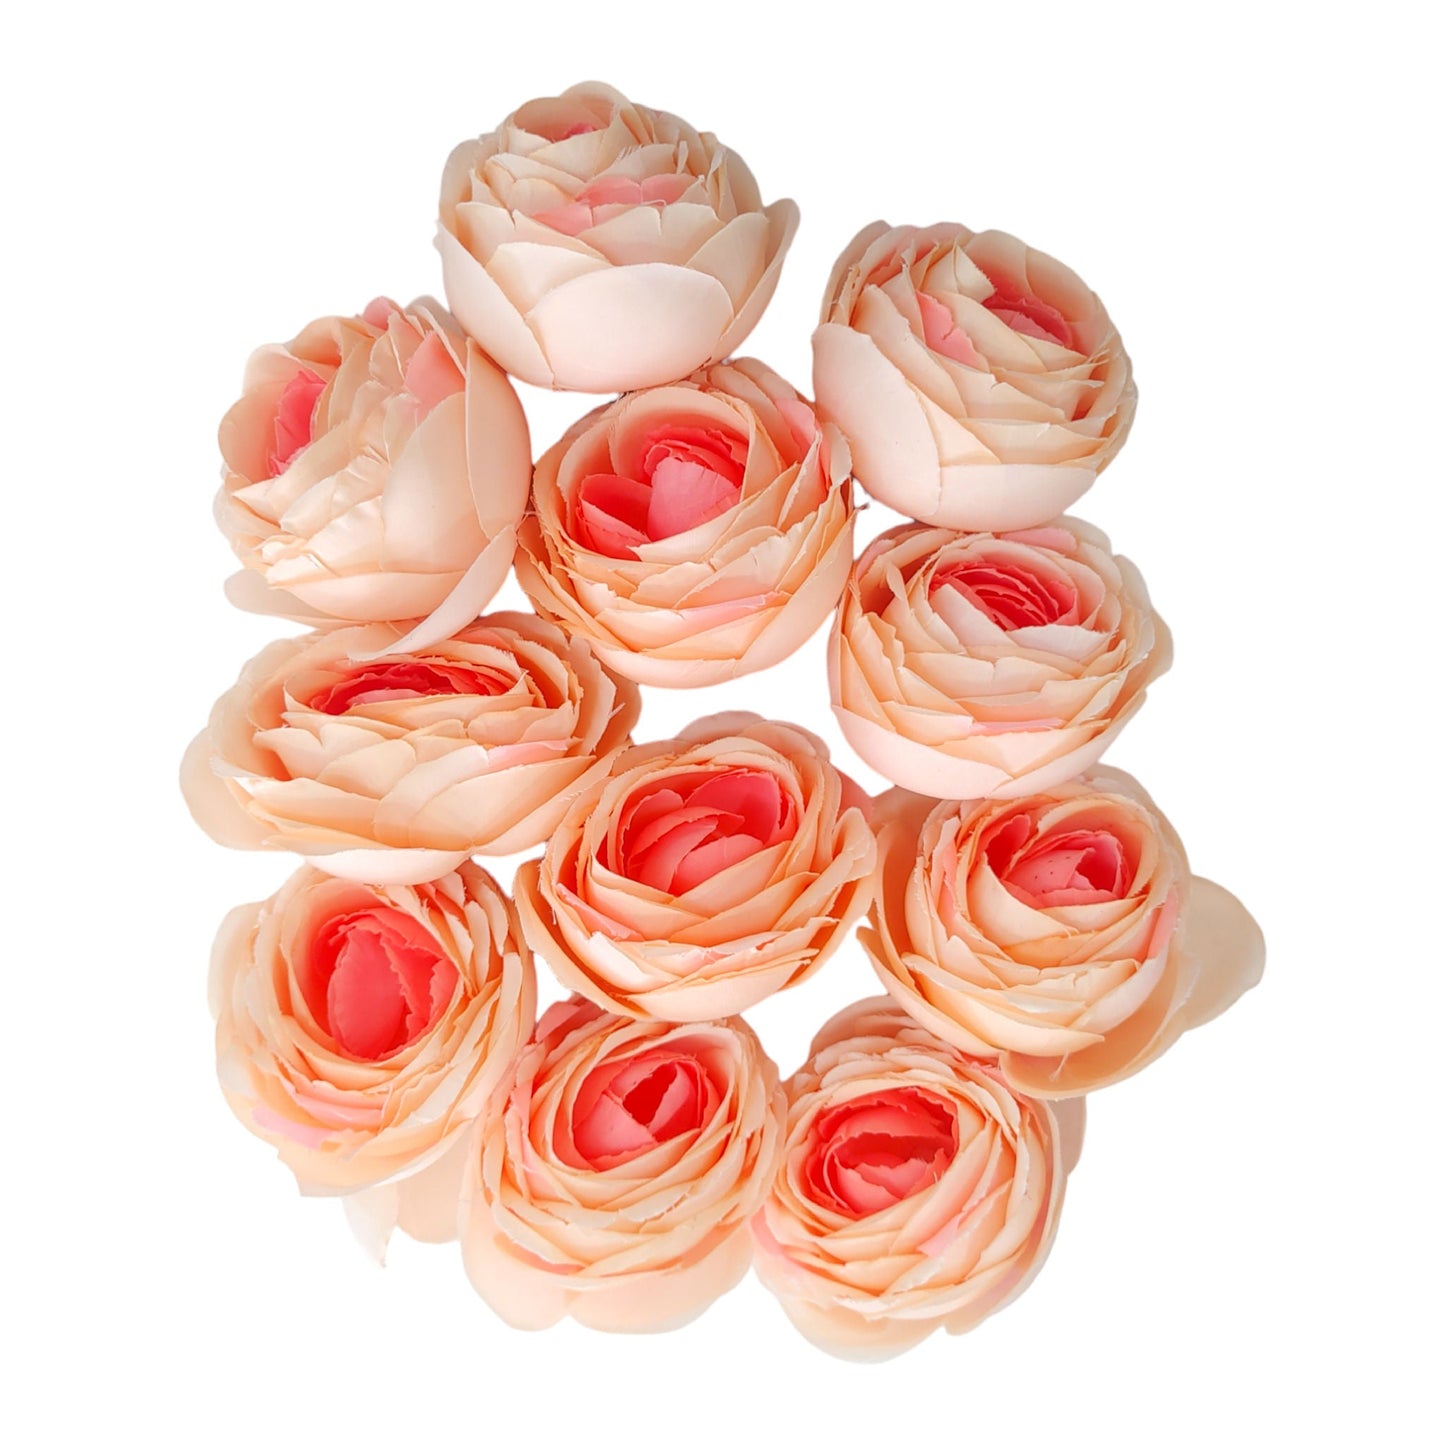 Indian Petals 6.5 cm Big Cabbage  Rose Fabric Flower Head For Crafting or Decoration - 20 Pcs, Onion Pink